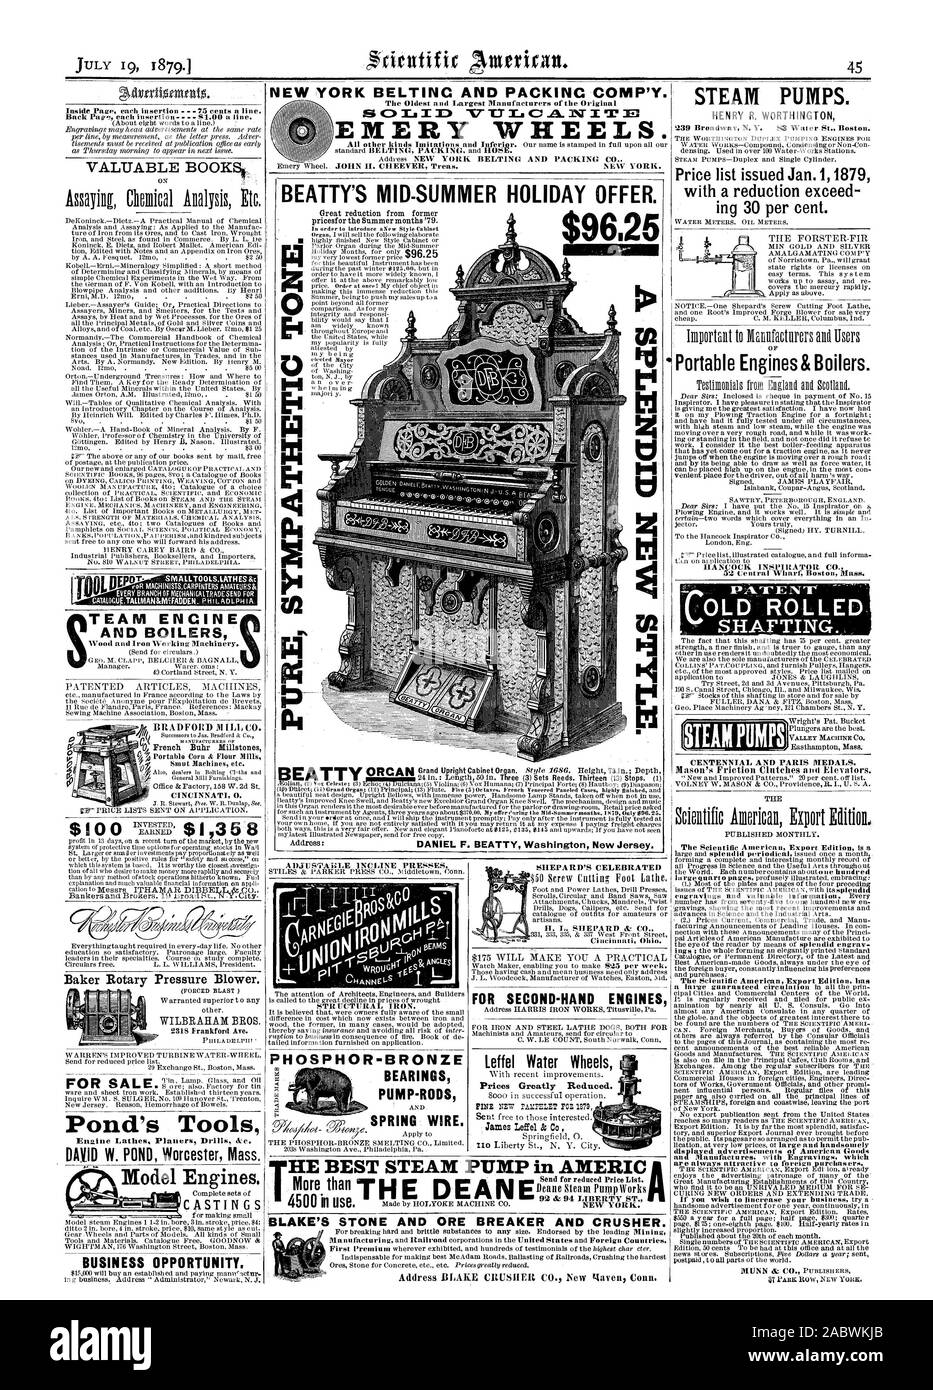 BEATTY'S MID-SUMMER HOLIDAY OFFER. $9625 ra lr WSrjwsW TEAM ENGINE AND BOILERS 4 Baker Rotary Pressure Blower. Pond's Tools BUSINESS OPPORTUNITY. PHOSPHOR-BRONZE BEARINGS PUMP-RODS STEAM PUMPS. HENRY R WORTHINGTON Price list issued Jan. 1 1879 with a reduction exceed ing 30 per cent. „ LOLD ROLLED SHAFTING. Model Engines. CASTINGS FOR SECOND-HAND ENGINES leffel Water Wheels Prices Greatly Reduced. BLAKE'S STONE AND ORE BREAKER AND CRUSHER. Address BLAKE CRUSHER CO. Neiv gave% Conn. NEW YORK BELTINC AND PACKINC COMP'Y. EMERY WHEELS., scientific american, 1879-07-19 Stock Photo